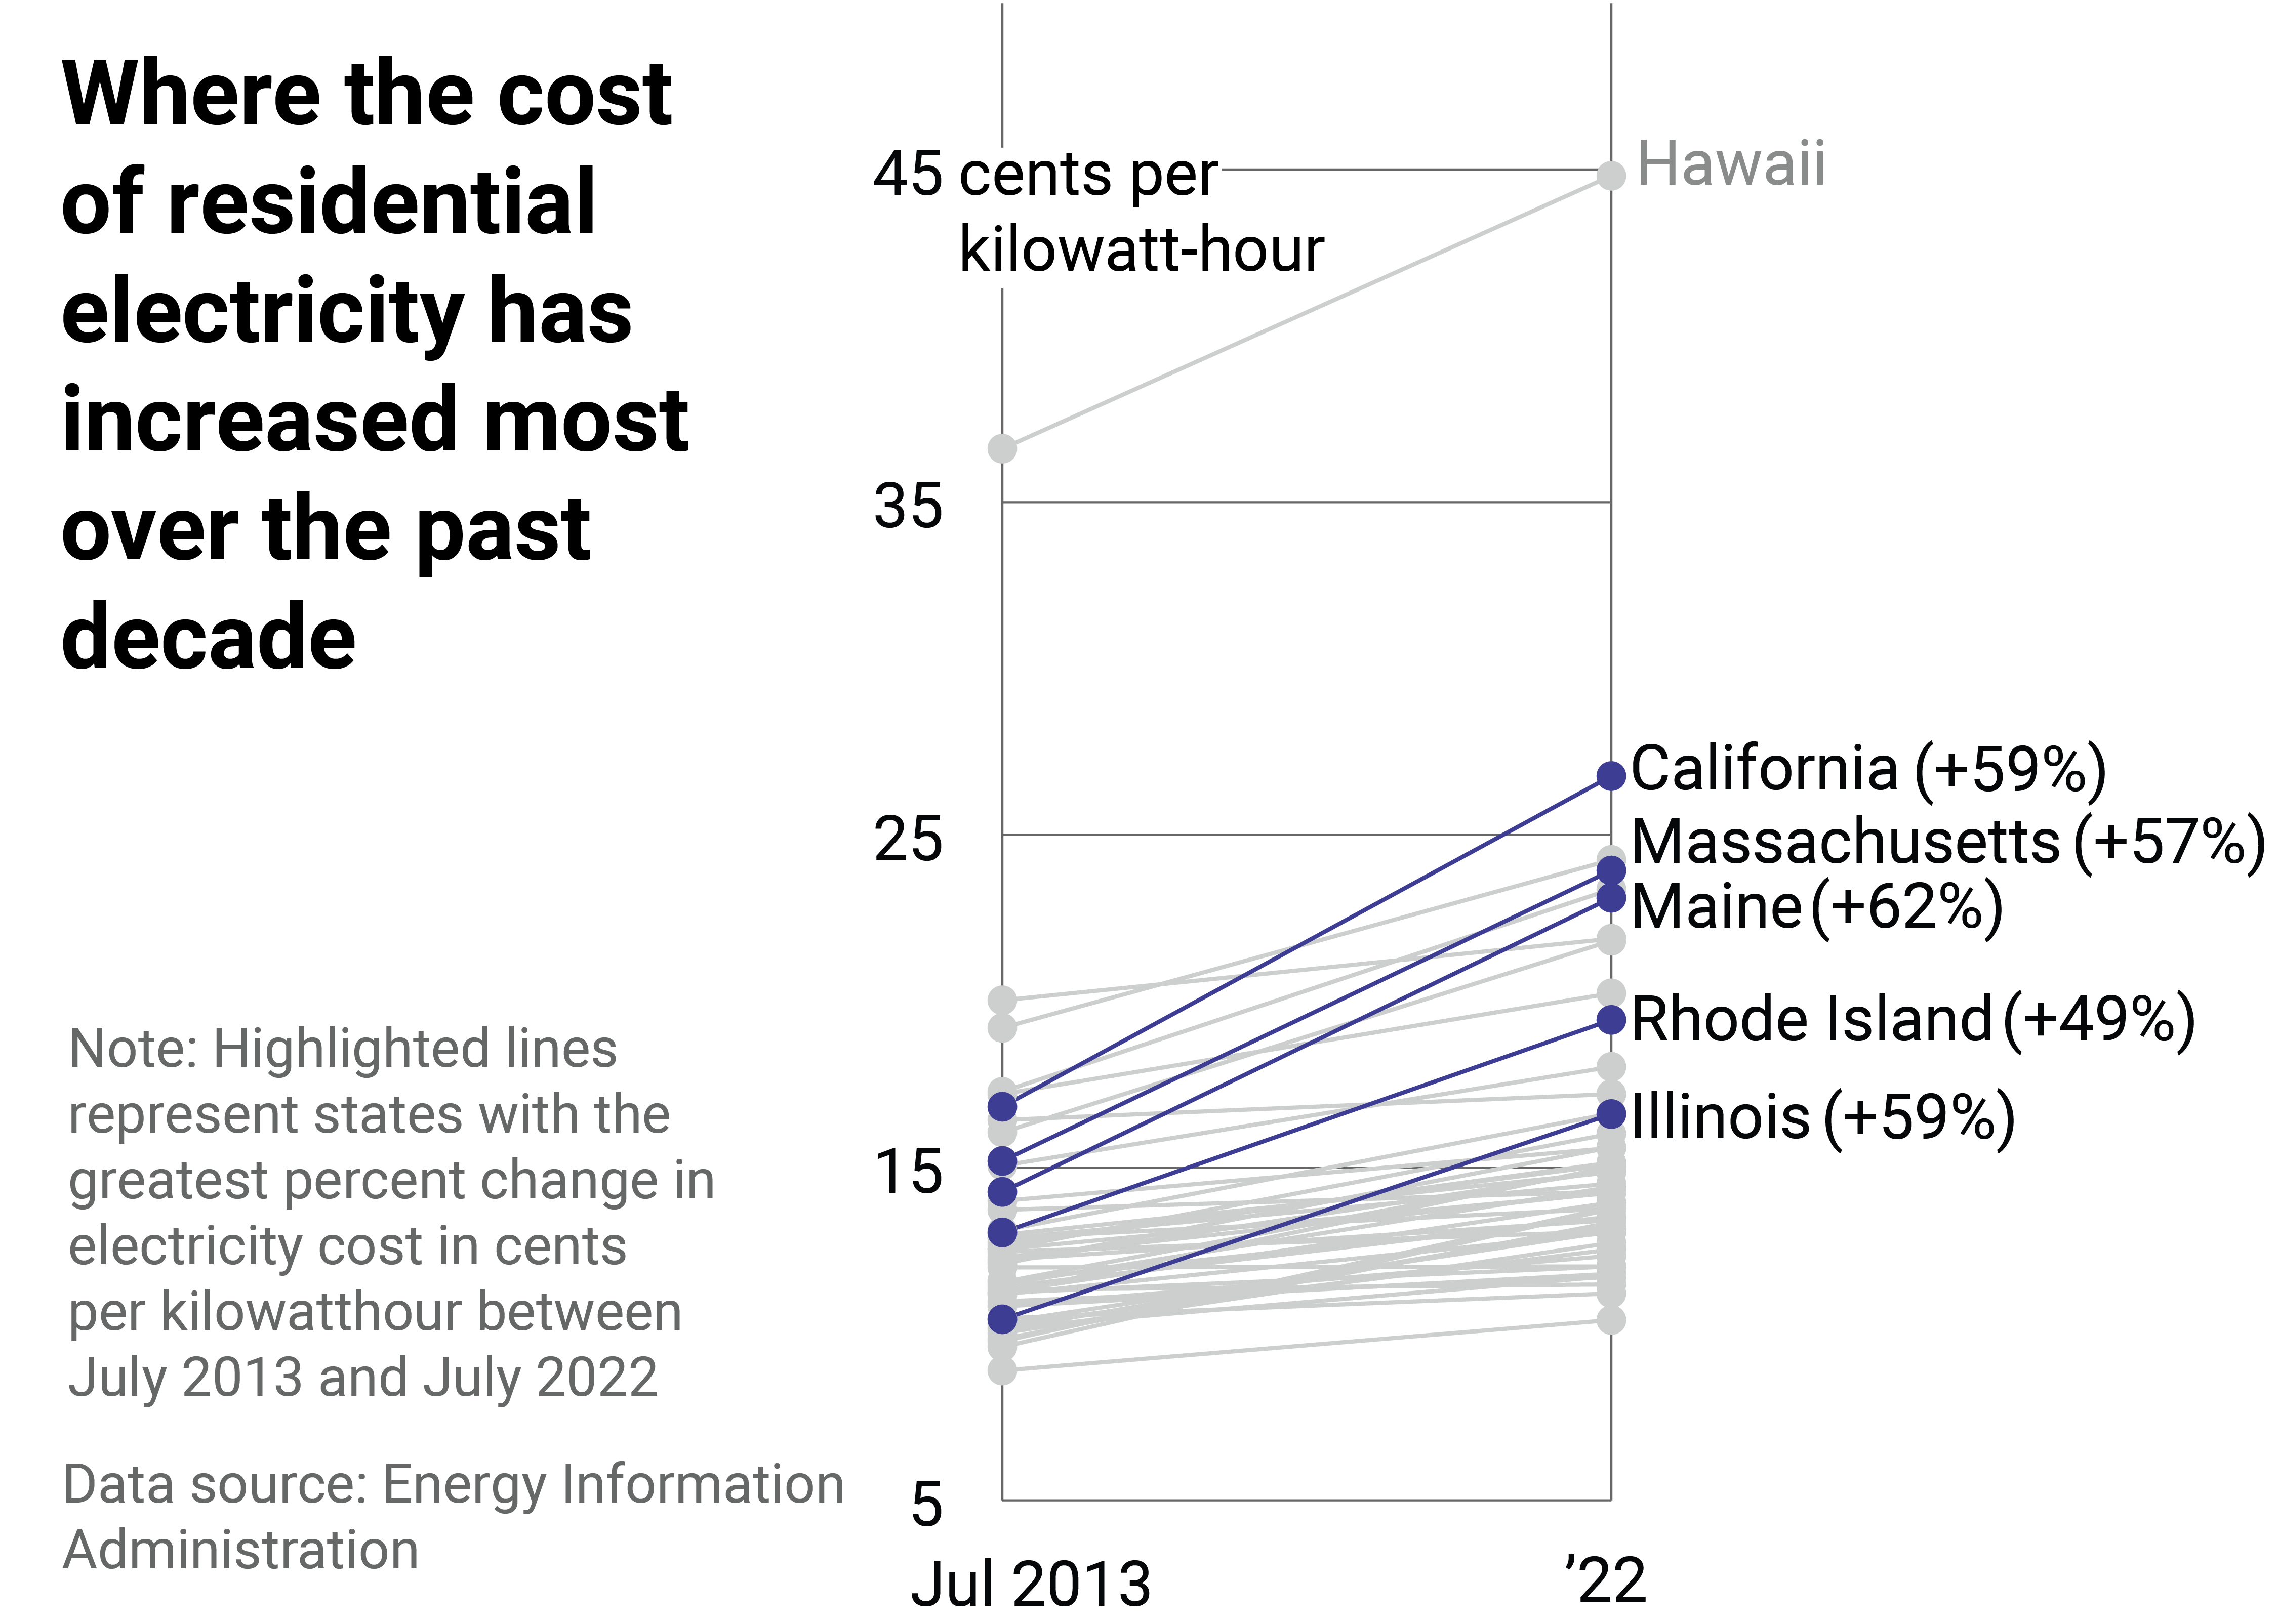 Line chart showing the seasonally fluctuating cost of electricity in centers per kilowatthour, with July 2022 setting a new record